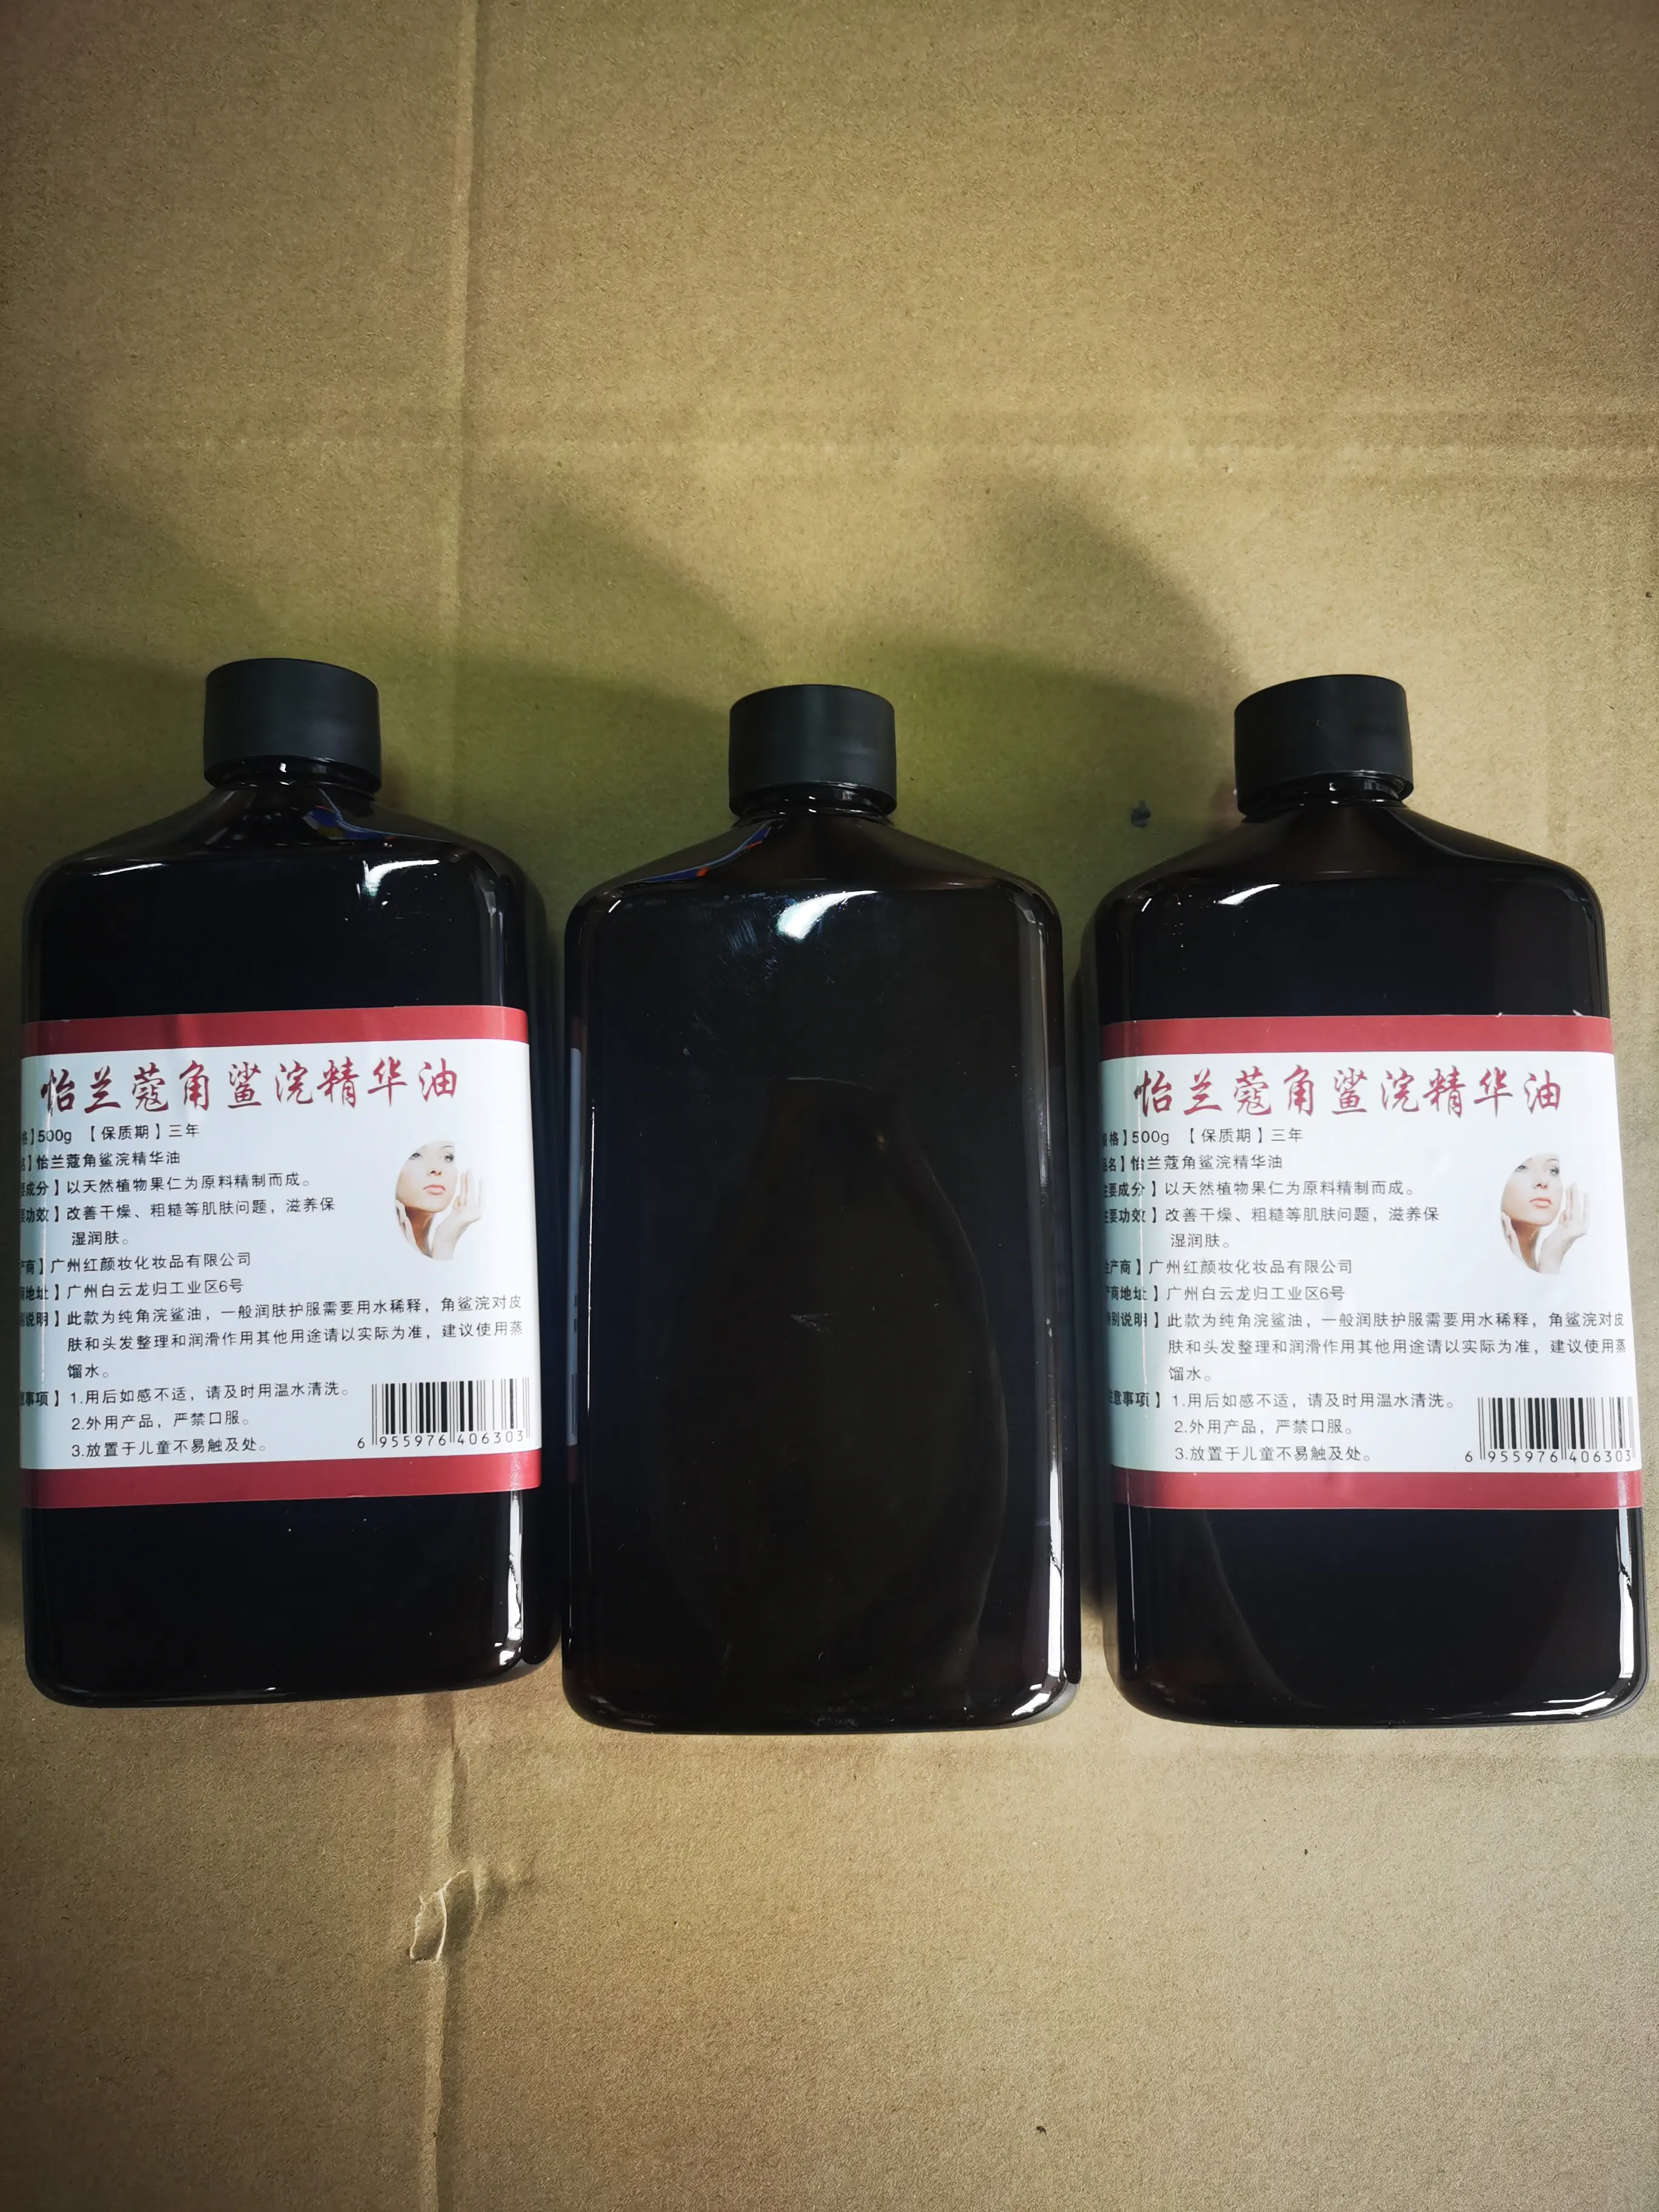 3 Days Fast Delivery 1 4-Butendiol Clear Liquid 99.7% Purity CAS 110-64-5 Liquid Sydney Melbourne Warehouse Stock